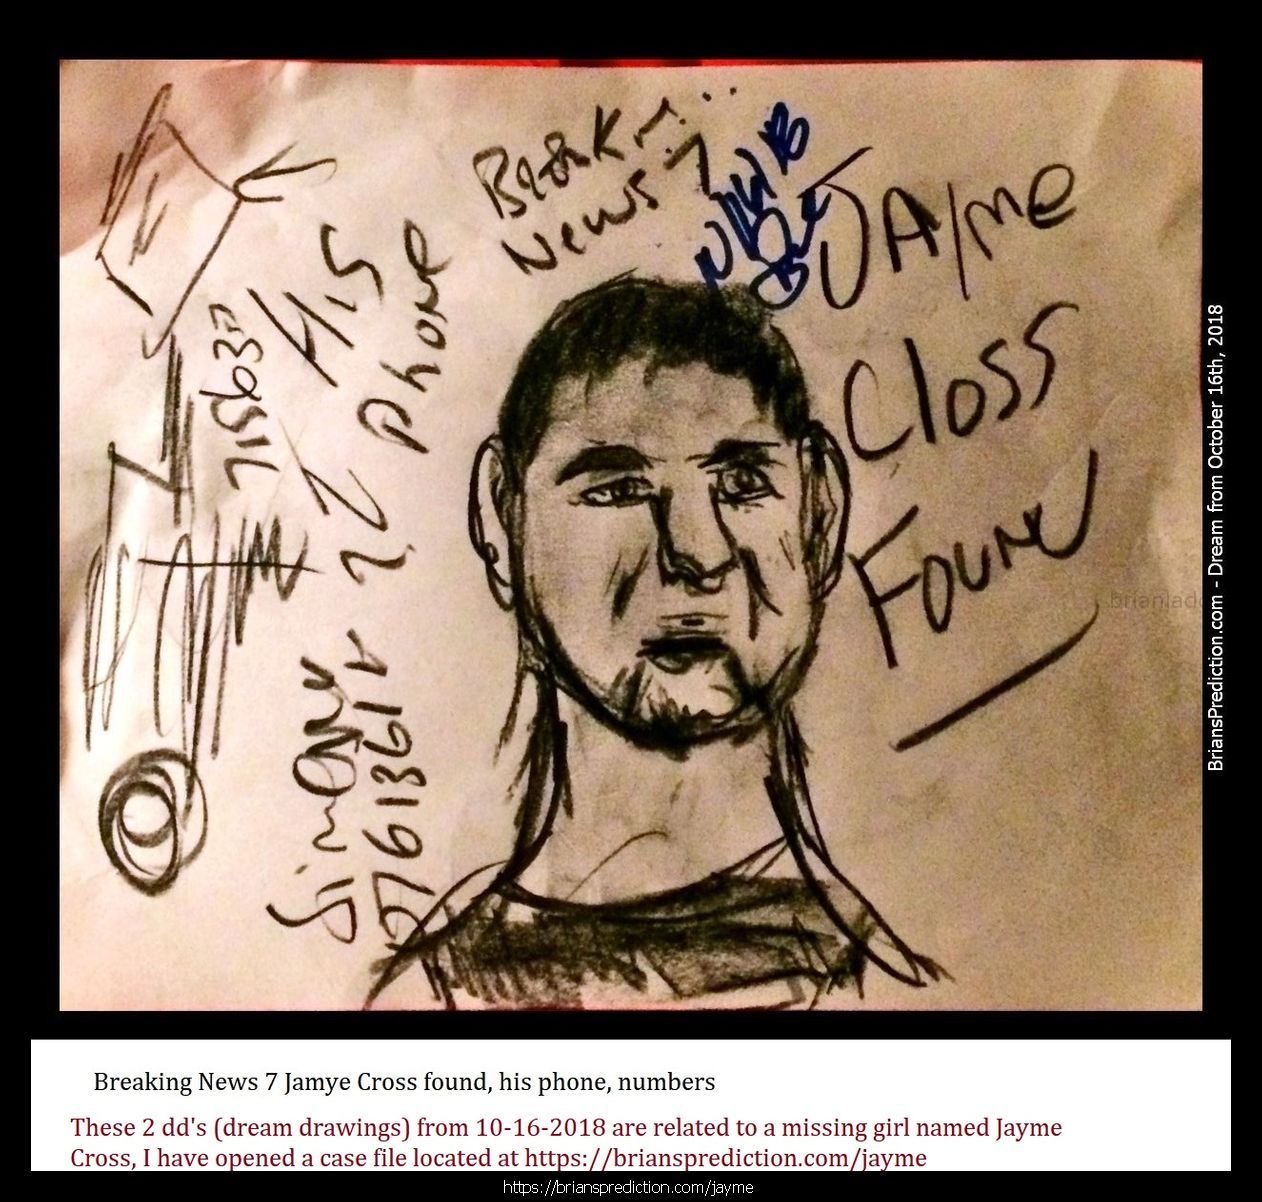 Jayme Closs Found Jayme Closs And The Deaths Of James Closs And Denise Closs 11185 16 October 2018 1 - 1/12/2019 These A...
1/12/2019 These Are The Dream Drawings Related To Missing Teen Jayme Lynn Closs The Murder Of  James Closs And Denise Closs (all From 2018)  I'M Aware Of Her Being Located On January 10th, 2019.  There Are Many Things That Do Seem To Make So Far And I Think There Is More To The Case Than Murder And Kidnapping And Lae May Be Missing Something Very Important And Involve Many More People  Will Post New Updates At   https://briansprediction.com/Jayme  Dream Text  Going To Kill Her, The Trailer Is At Cenex In Barron.  Jayme Closs, They Were In The House For 45 Minutes Before The Killings, Look Under The House Again.  Jaymee Closs Found, Go Back Look In The Crawlspace, The Phone She Used To Talk To Him Is There, Cars Unrelated, Motorcycle, Police Missed The Box?  Jayme Closs, Body Found 6 Miles From Home, January 12th, 2019, Lazy Eye, Returns To Home (this Is For January 2019 And Does Not Mean She Has Already Been Murdered)  Jaymee Closs Found, Look Again, Drove Right By The Trailer, Dallas (I Realize Dd Says Dallas, I Do Not Think This Trailer Is In Texas)  Jayme Closs Look Again, He'S Going To Kill Her On December 16th, Hania Aguila Killed December 25th, Numbers, Church, Trailer (may Not Be The Right Translation Of Last Nights Dream But I Will Be Posting Additional Dreams On These 2 Cases In A Few Day  Trailer, He Took Her Here, Hania Noelia Aguilar Found, Fire Tower, 27, More Numbers.  He'S Taking Another Girl, Trailer, December 2018  Mollie Tibbits Is Still Alive After Killing, Trailer, 27, 27, 57 Feet, Fire Tower, He Going To Take Another Girl - Always 2. I'M Aware She Is Not Alive And I'M Not Sure What This Means.  Hania Aguilar Case May Be Related To The Jayme Closs Case An Could Explain Why I'M Having So Much Difficulty Finding This Trailer.  Jayme Closs Is Still Alive In Trailer, Lacross Thee Dreams Are From November 11th - 13th 2018 And Are From My Hospital Room In Port Saint Lucie Florida. Please Visit My Site News For More Details On This Case At   https://briansprediction.com/News.Php  Jayme Closs, Police Are Withholding This Item, Someone Knows When She Had This, Drugs (meth) Are Being Shipped In And Out Of Turkey Plant In The Bird'S Cavities, Road Dogs Biker Gang.  Box In Truck, Colton Treu, Was In Rice Lake, Eau Claire, Refrigerated Trailer, Knows Where Jayme Closs Is?  The Man At Cameron? Who Will Go To James Closs'S Funeral Is The Same Man Who Has Jayme Closs  10/24/2018 From All Thee Dream Drawings (dd's) This Is The Trailer Jayme Closs Is Being Held In. Dd States That Le Already Searched The Area But Did Not Break The Lock, The Man Who Took Jayme Has The Only Key.  2018 2 Psychic Prediction.Jpg  Connersville, Numbers, Jayme Cross (this Is Important)  Jayme, Look Again, She Missed It (Jayme Cross Search Area Related)  October 23rd, 2018 Jaymee Closs News Report? Links To Auto Garage And Moms Boyfriend, Rice Lake.  This Is The Same Trailer Related To The Jayme Cross Case.  124 Files On 2 Page(S)  Engle Creek Springs, Jayme (maybe Related To Jayme Cross Missing Teen Case, This Is A Real Location Map Included)  Dark Blue Car, I'M In The Back Seat And This Is What I Can See, There Are Crosses Handing Inside The Car And On The Floor (this Is A Lucid Dream Form 10/19 Or 10/20 Of 2018)  Engle Creek Springs, Jayme (maybe Related To Jayme Cross Missing Teen Case, This Is A Real Location Map Included)  Missing Teen Jayme Closs I Believe Will Be Located Shortly, I Will Post What I Can At   https://briansprediction.com/Jayme Expect Some Sort Of Update By Le On October 23rd And Much More To Follow!  Jayme Closs And The Deaths Of James Closs And Denise Closs 11185 16 October 2018 1 Psychic Prediction  Mithe Cartel Did Not Do This, Grain Silo (this May Or May Not Be Related To A Missing Person Case Jayme Closs)  Auto Garage And Flags Metal Rebar, Jayme Closs Would Walk Her To See Him, Go Back, Numbers.  Aka? Dawn Gordon Jayme Closs, Id, Renee Is A Hero, Rx (no Clue How This Is Related To Jayme Closs Missing Girl Case Unless Its Another Jayme, Awful Dream Though)  Road Block ??? Wisteria Lane South West In Adamsville, Missing Girl Jayme Closs With Steven K.  Jayme Closs, Wrong Information, She Had More Than One Fight With Her Parents, Look In Her Room Again (whatever Was Found In Her Room By Le Has More To It And Will Provide A More Accurate Location Than What They Are Going By Right Now)  Eau Claire, Jayme Closs Deerfield Road?  Missing Jayme Closs And The Deaths Of James Closs And Denise Closs.Jpg  Jayme Closs Search Map  Dna Of Steven Procopio Fount At Home Of James And Denise Closs In The Bathroom.  Jayme Closs And The Deaths Of James Closs And Denise Closs 11185 16 October 2018 1 Psychic Prediction.Jpg  These 2 Dd'S (dream Drawings) From 10-16-2018 Are Related To A Missing Girl Named Jayme Cross, I Have Opened A Case File Located At   https://briansprediction.com/Jayme  Jayme Closs And The Deaths Of James Closs And Denise Closs 11186 16 October 2018 2 Psy
